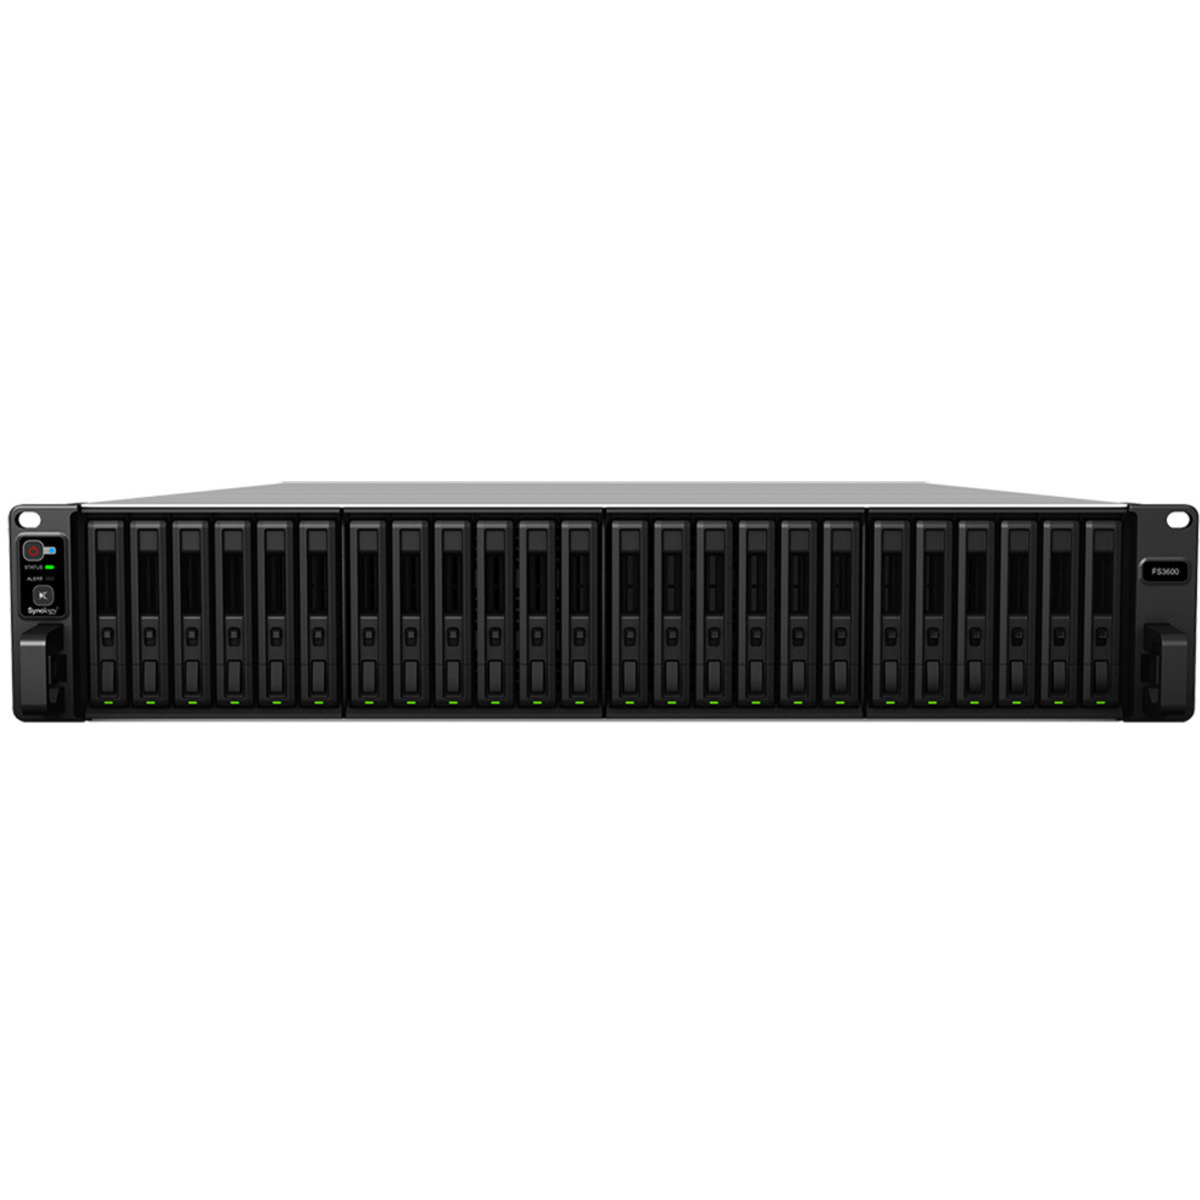 buy Synology FlashStation FS3600 RackMount NAS - Network Attached Storage Device Burn-In Tested Configurations - FREE RAM UPGRADE - nas headquarters buy network attached storage server device das new raid-5 free shipping usa christmas new year holiday sale FlashStation FS3600